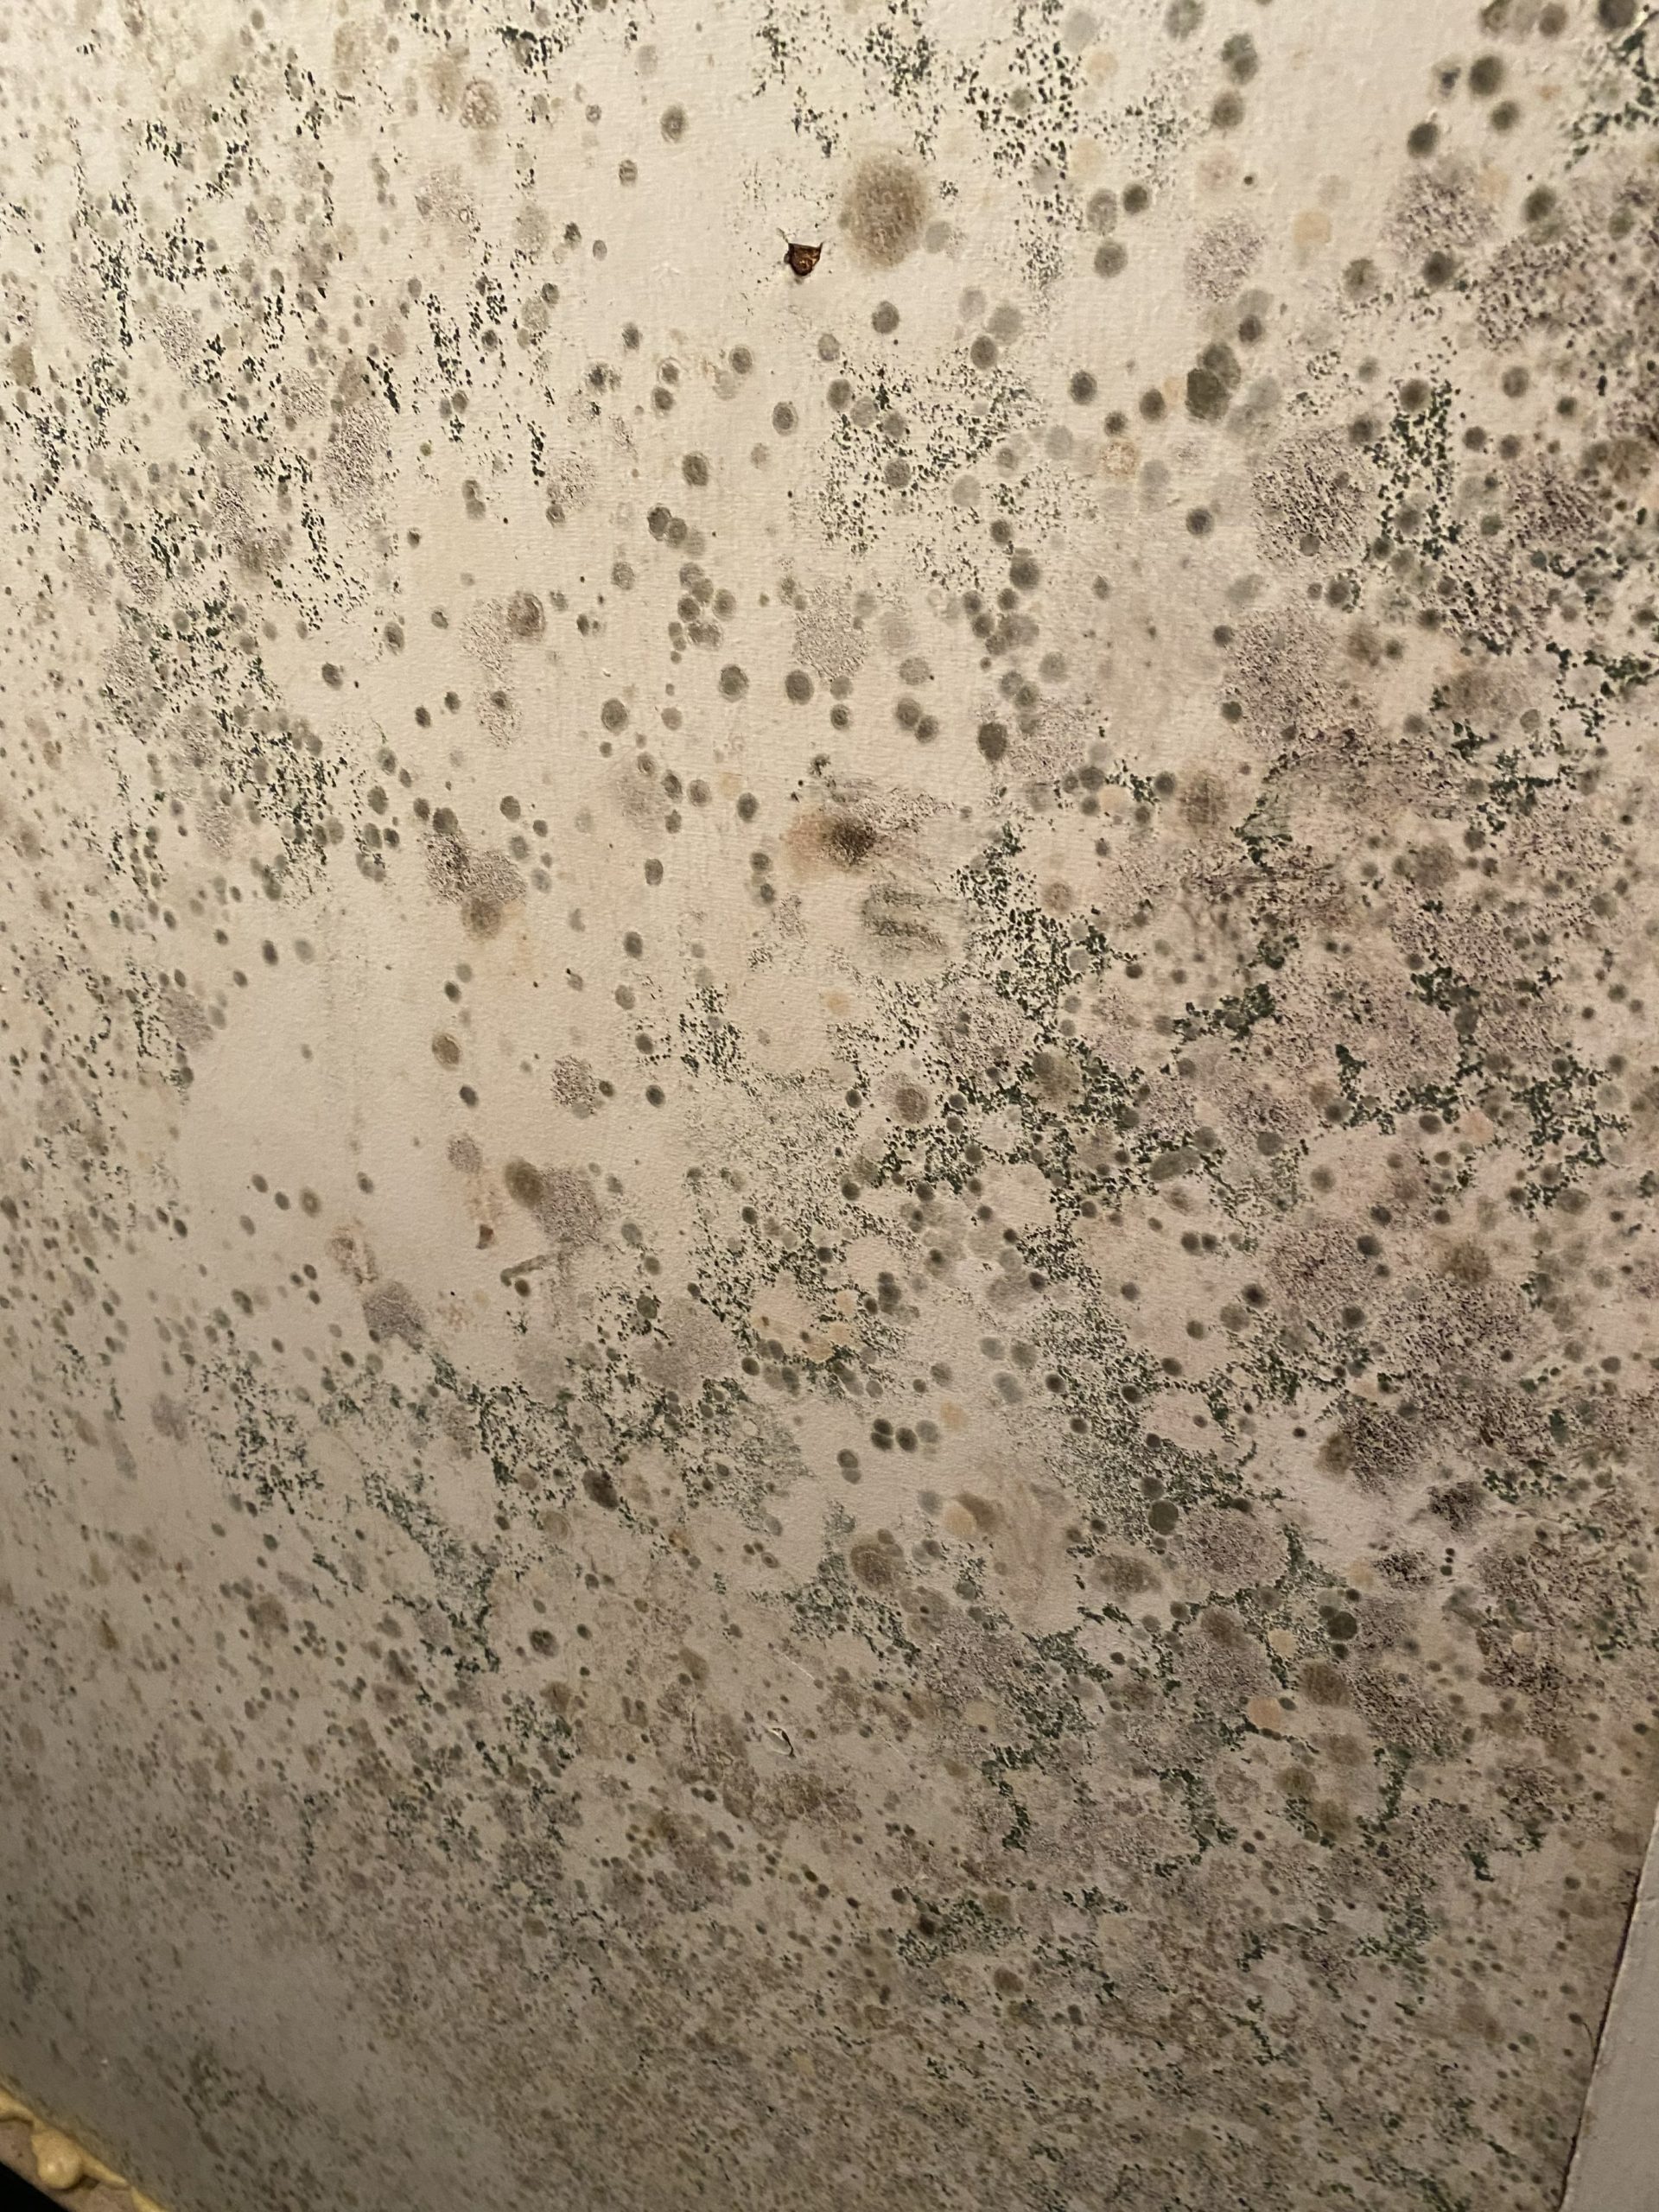 Mold can feed off anything that was once living, including drywall and even wood framing.